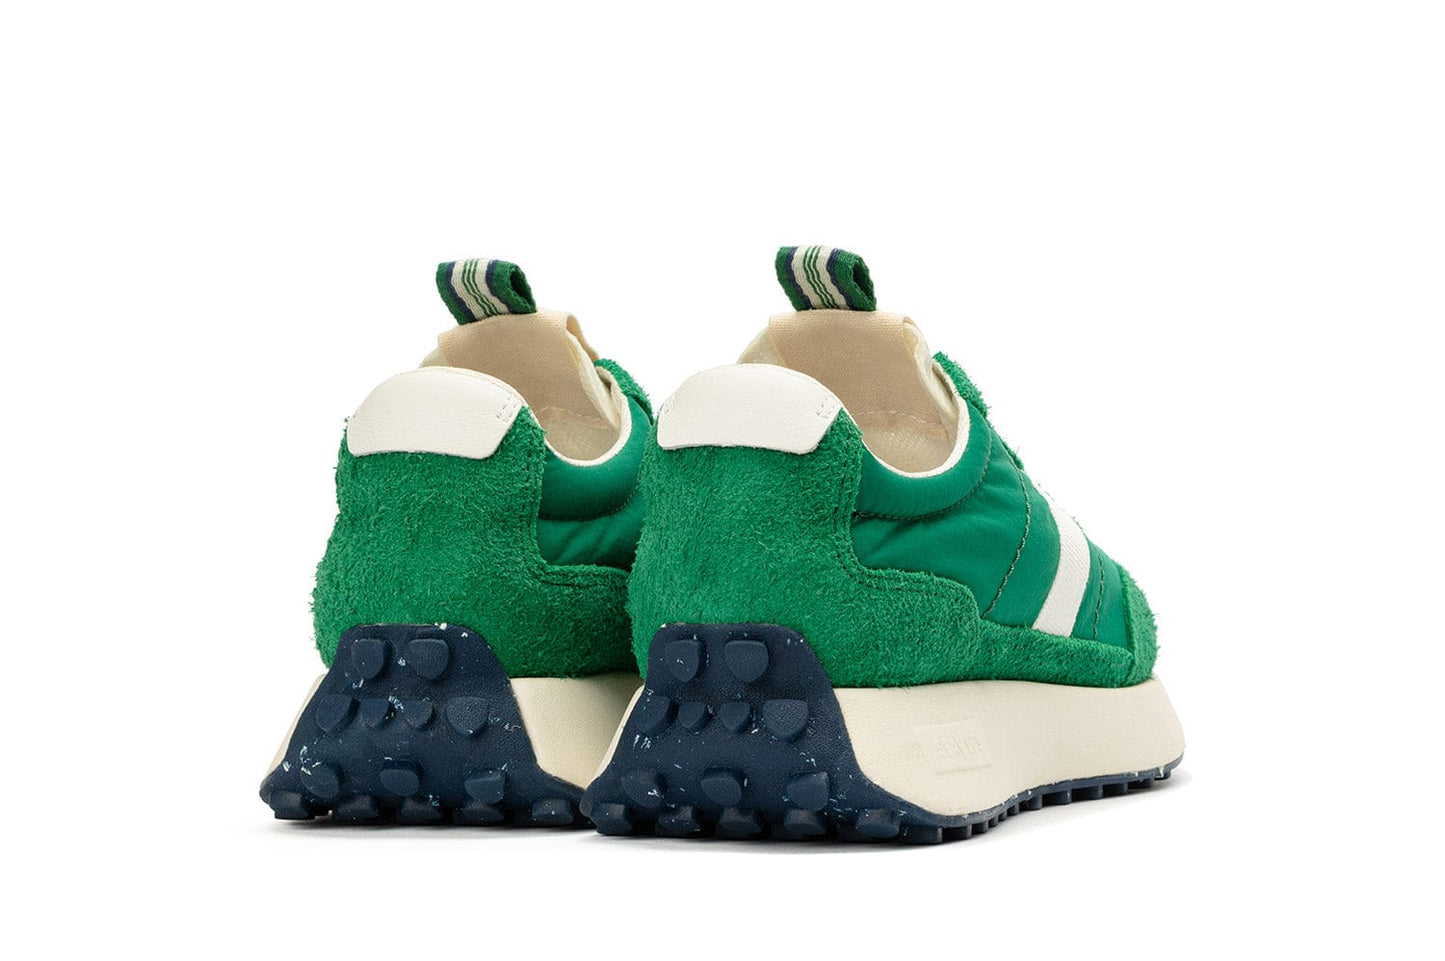 Rear-angled view of the Acorn Trainer in Grass Green, showcasing the pull tab and recycled material sole.